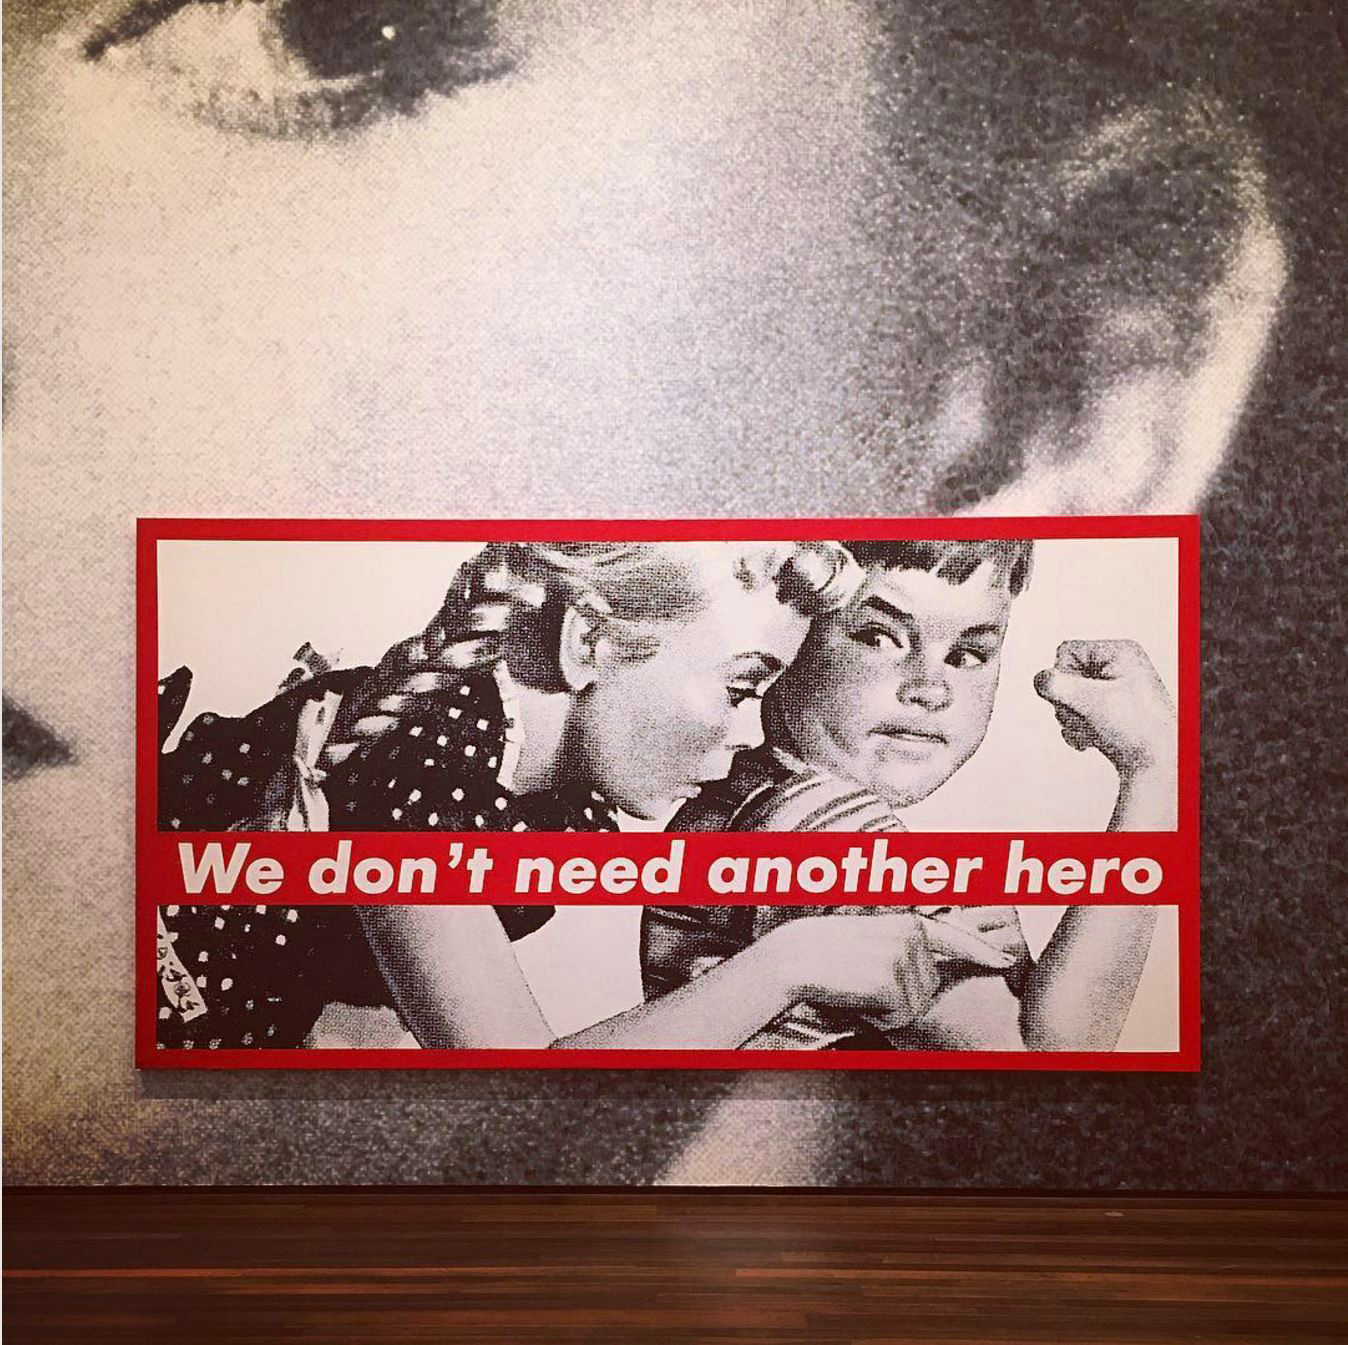 Barbara Kruger at the National Gallery of Art